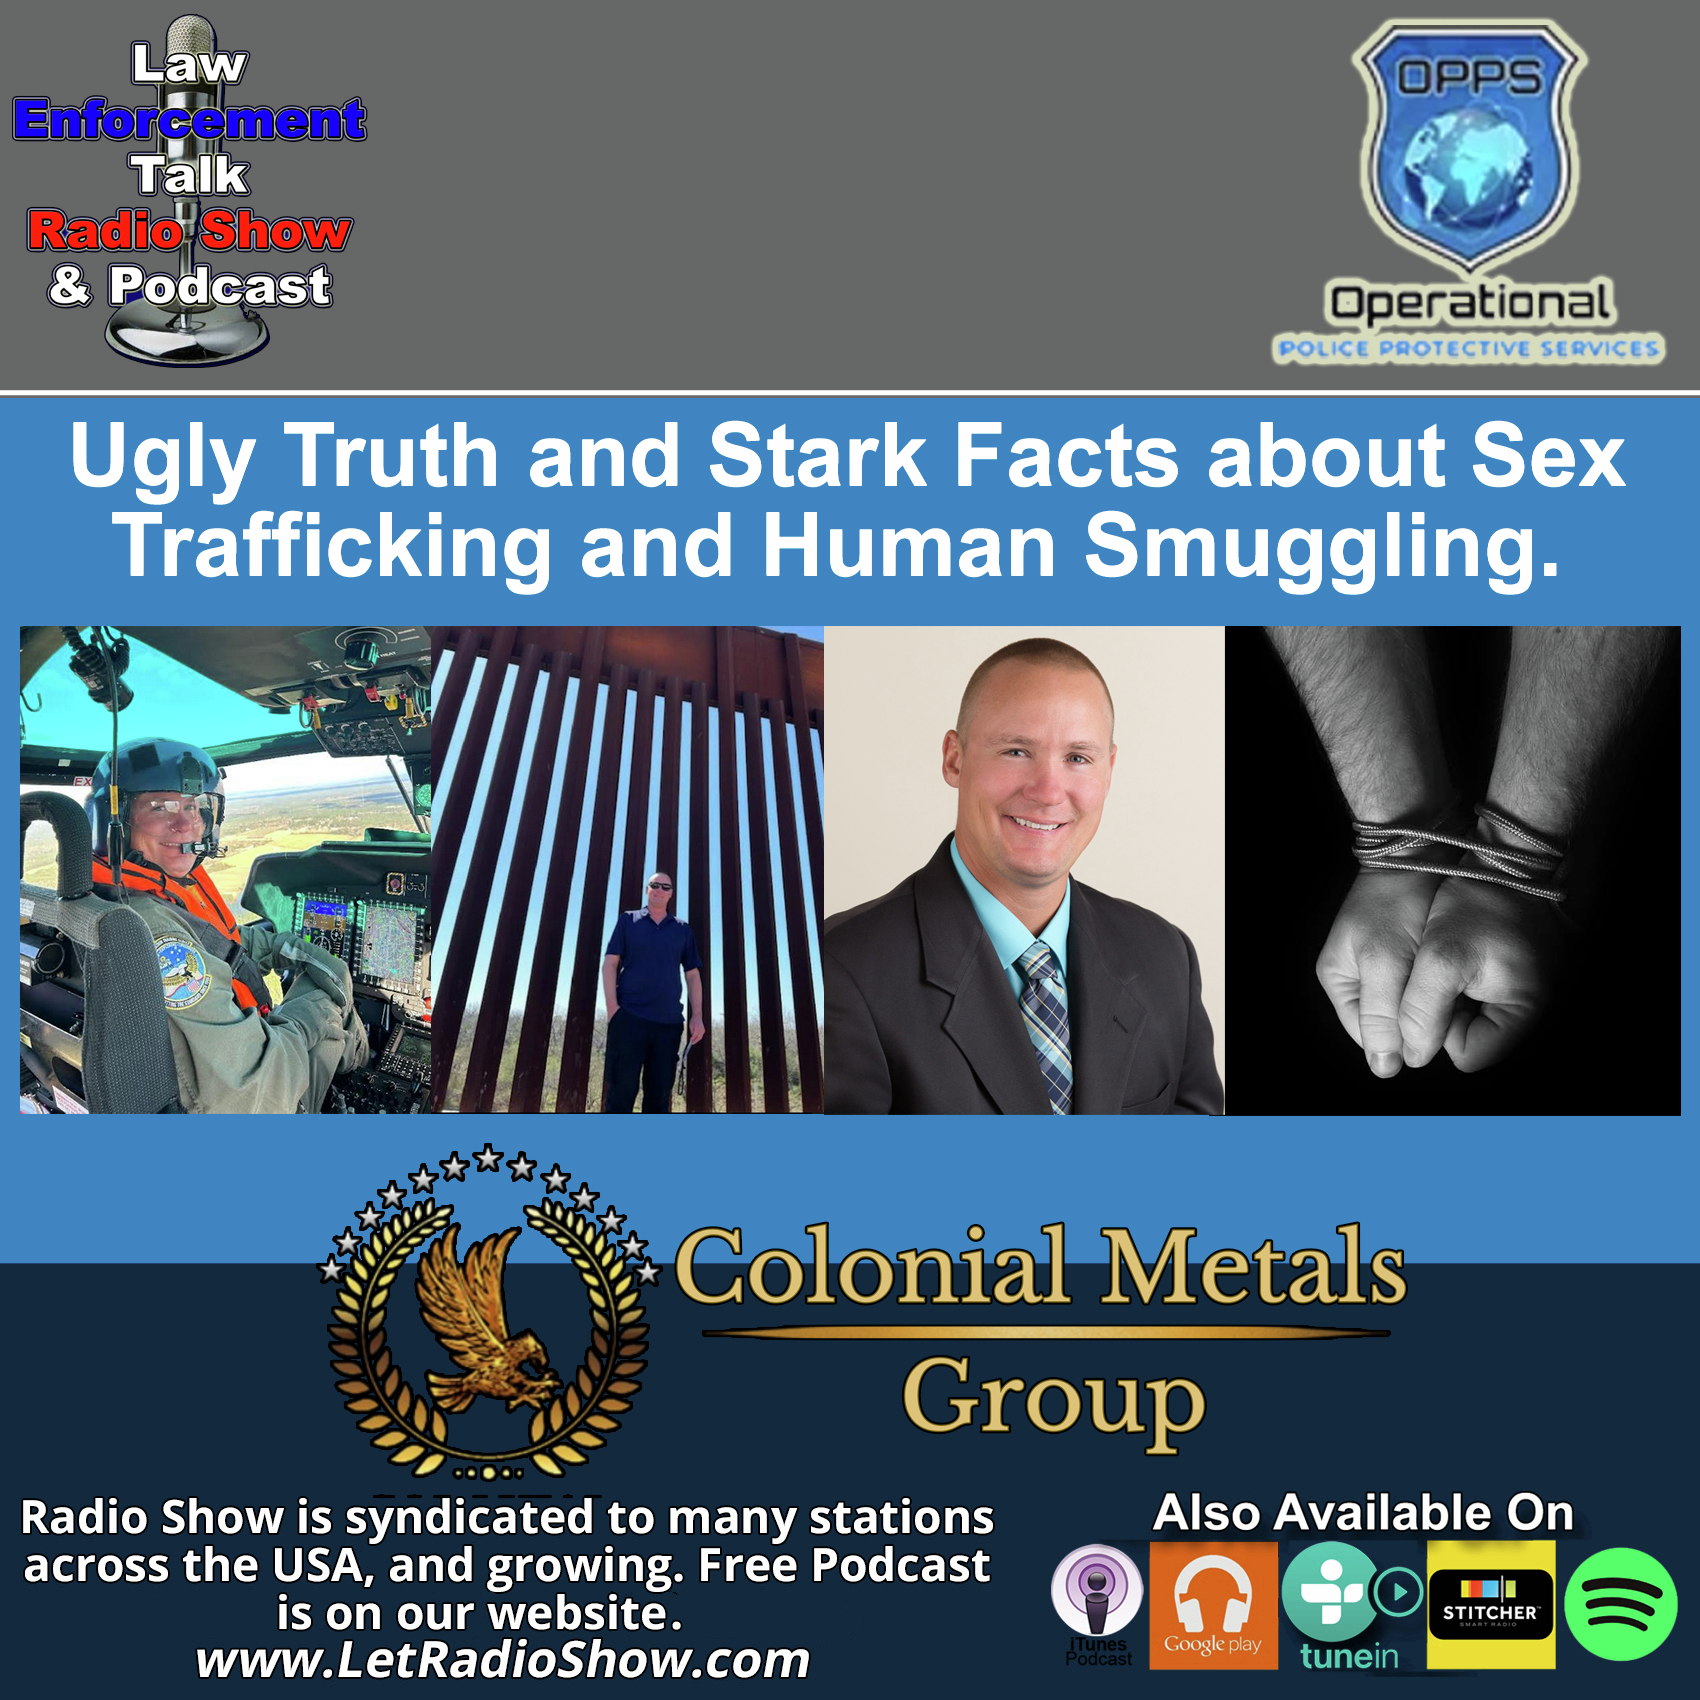 American Human Smuggling Facts and Fears, The Ugly Truth.